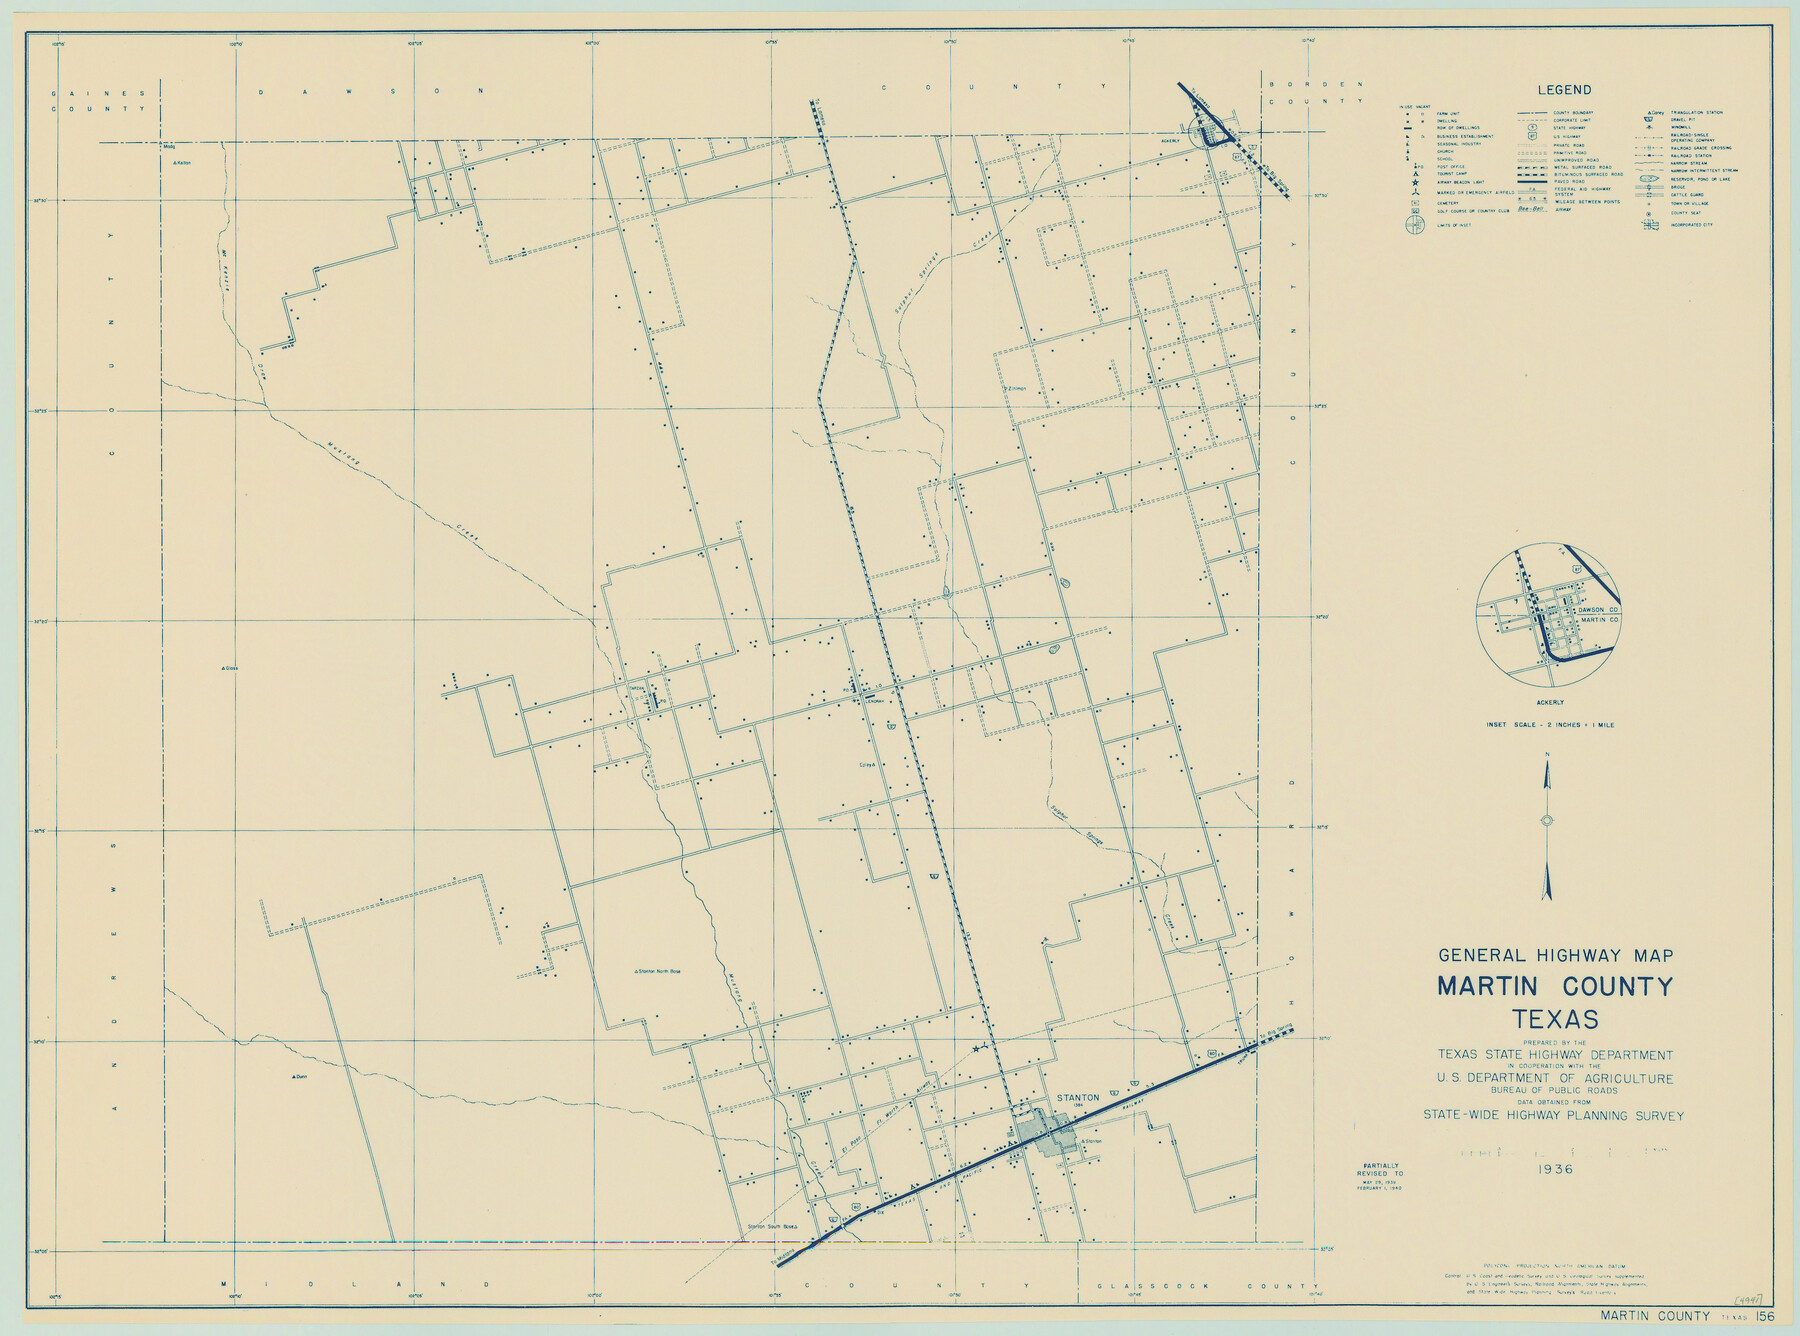 79185, General Highway Map, Martin County, Texas, Texas State Library and Archives